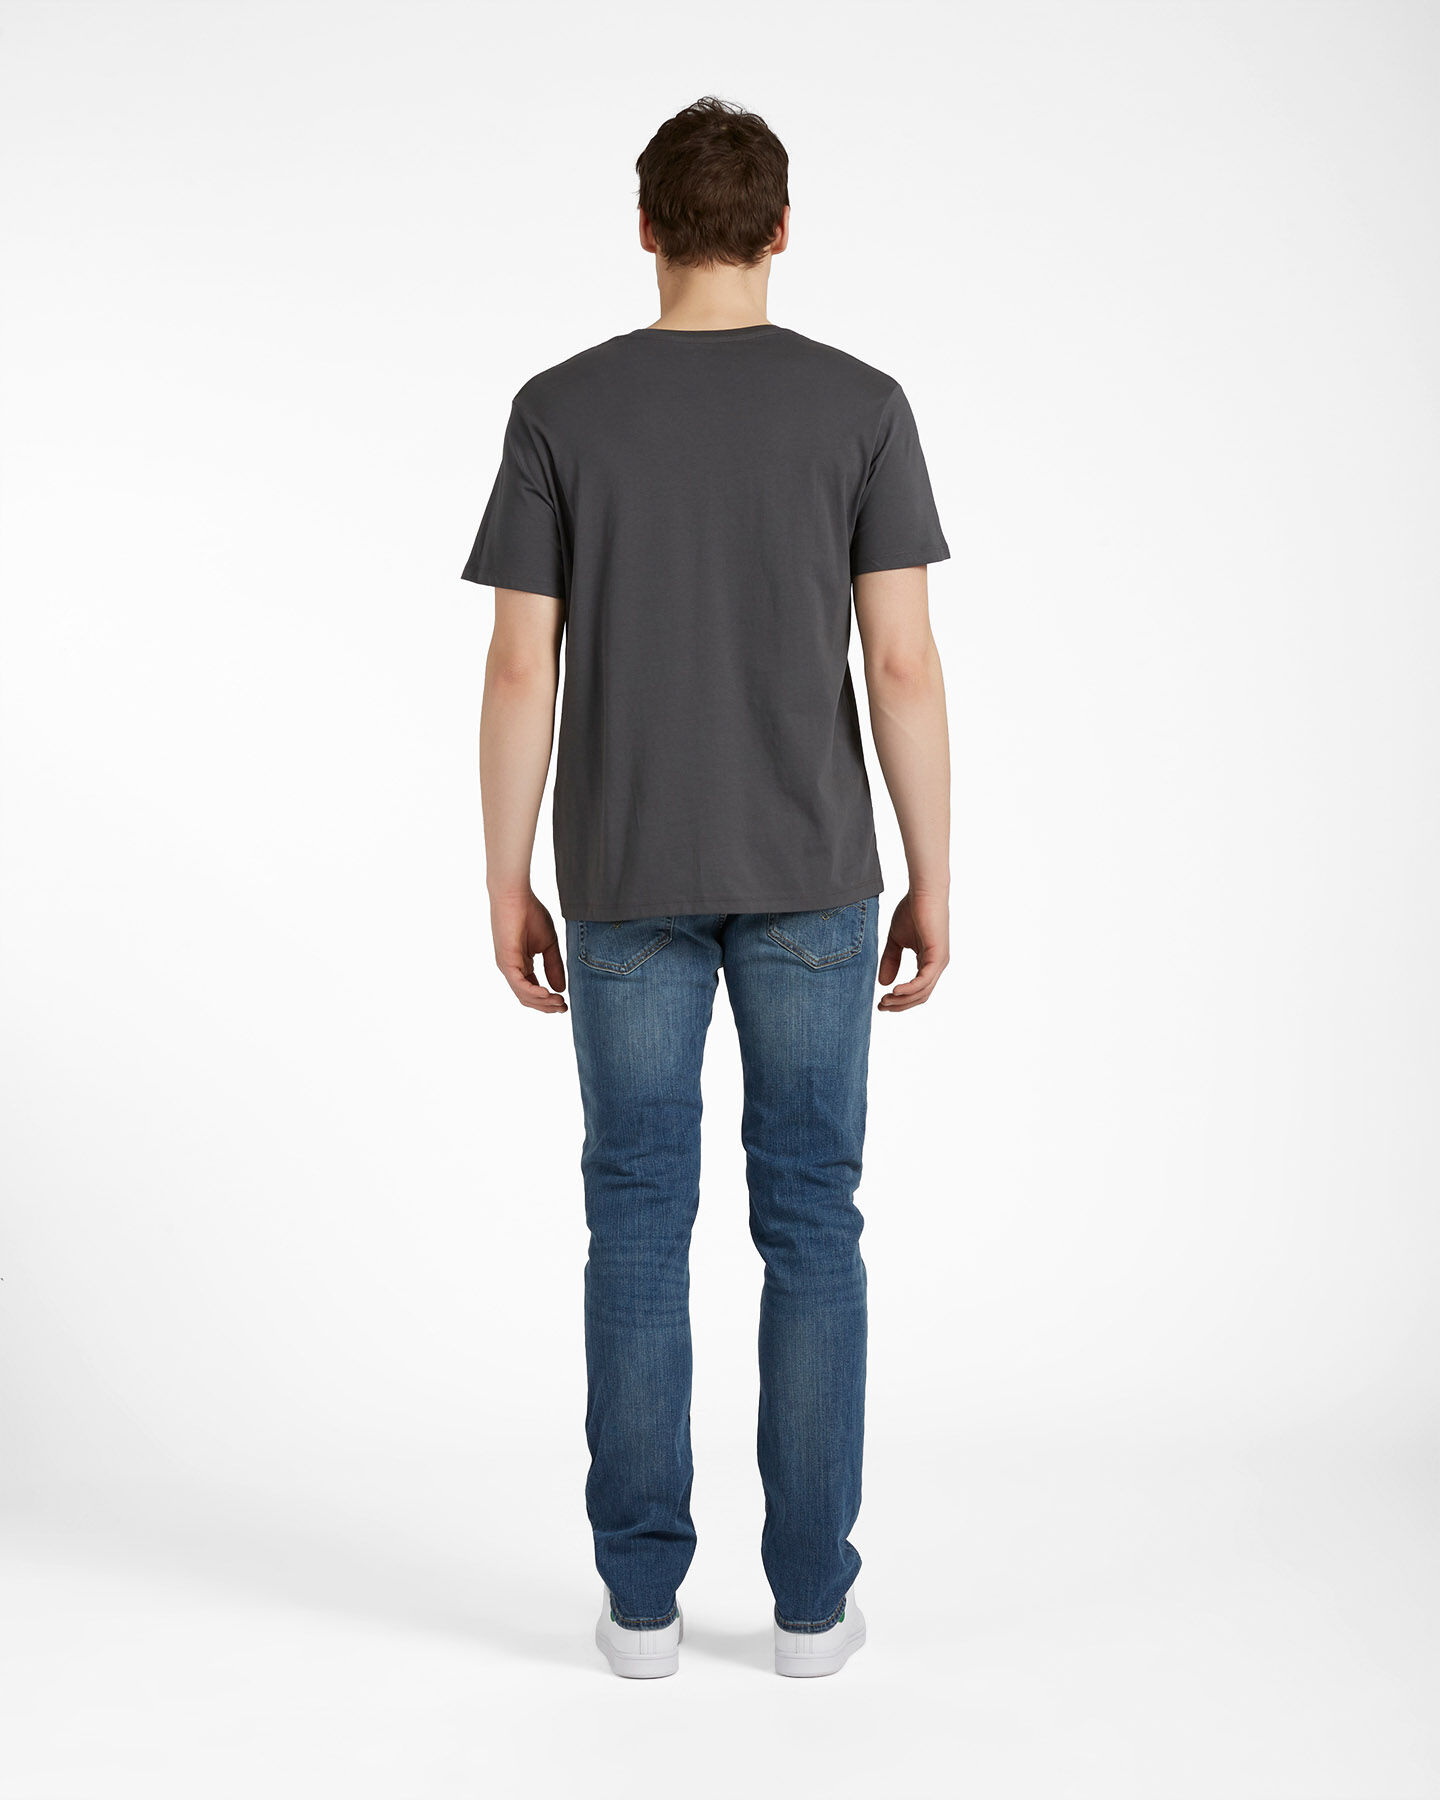  T-Shirt LEVI'S GRAPHIC LOG M S4087713|0248|XS scatto 2